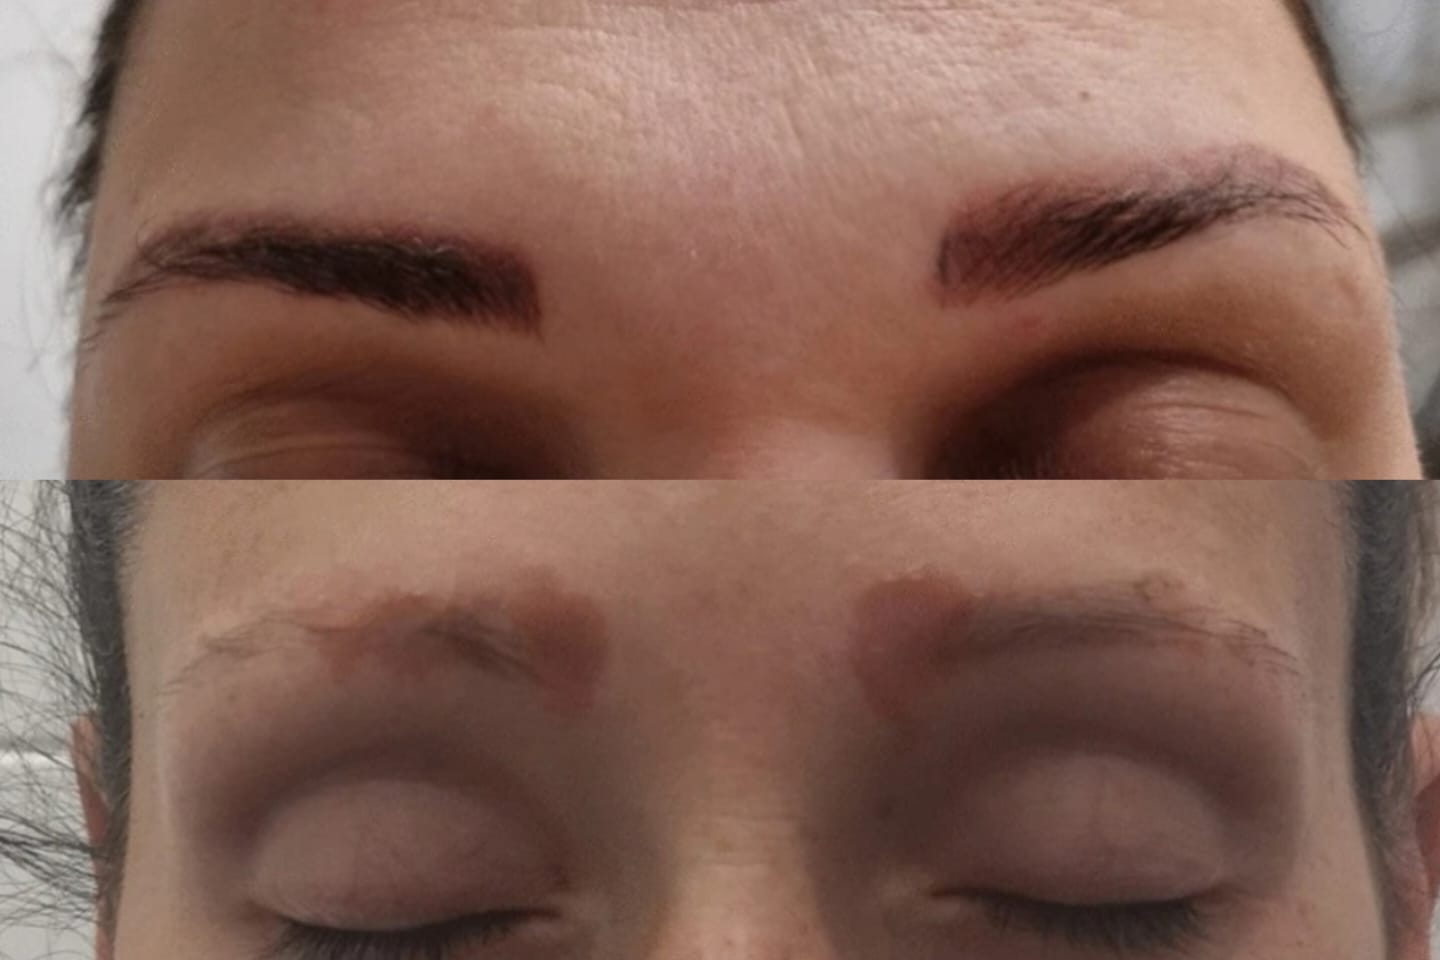 Women suffer from lung damage after having eyebrow plastic surgery